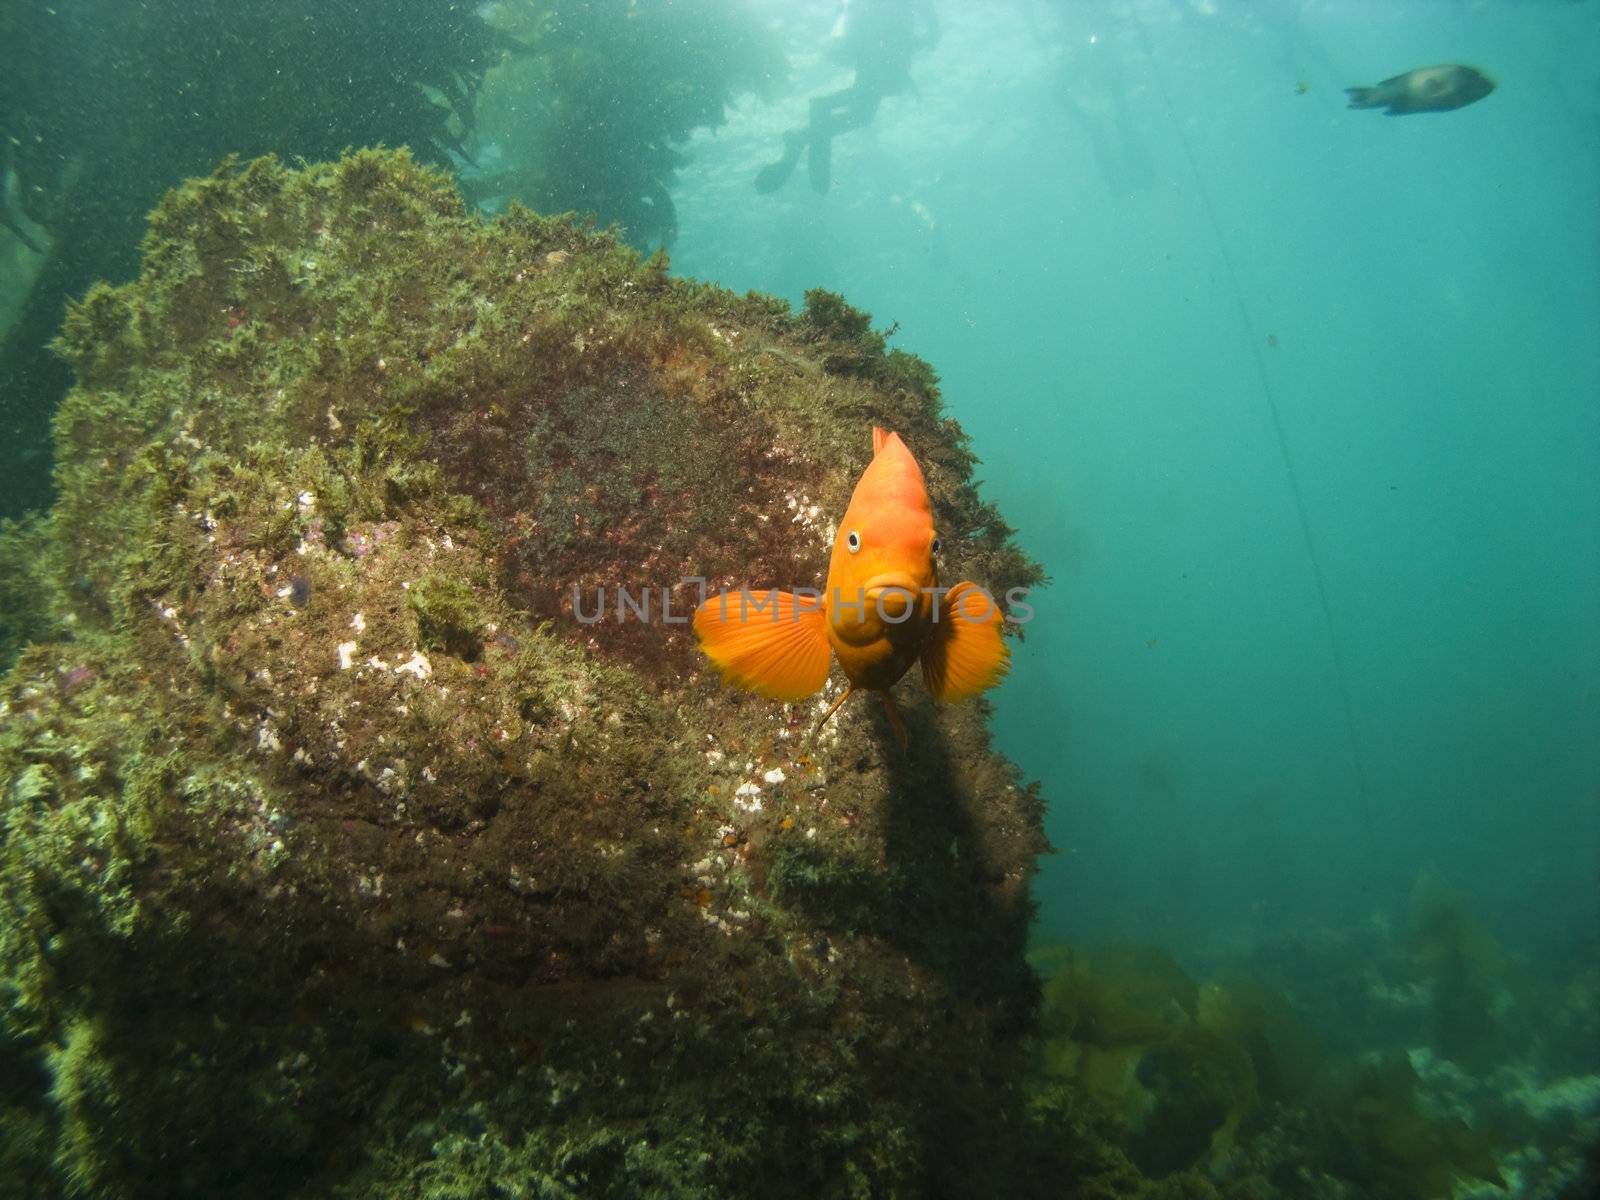 Garibaldi looking into camera with Divers in the Background by KevinPanizza